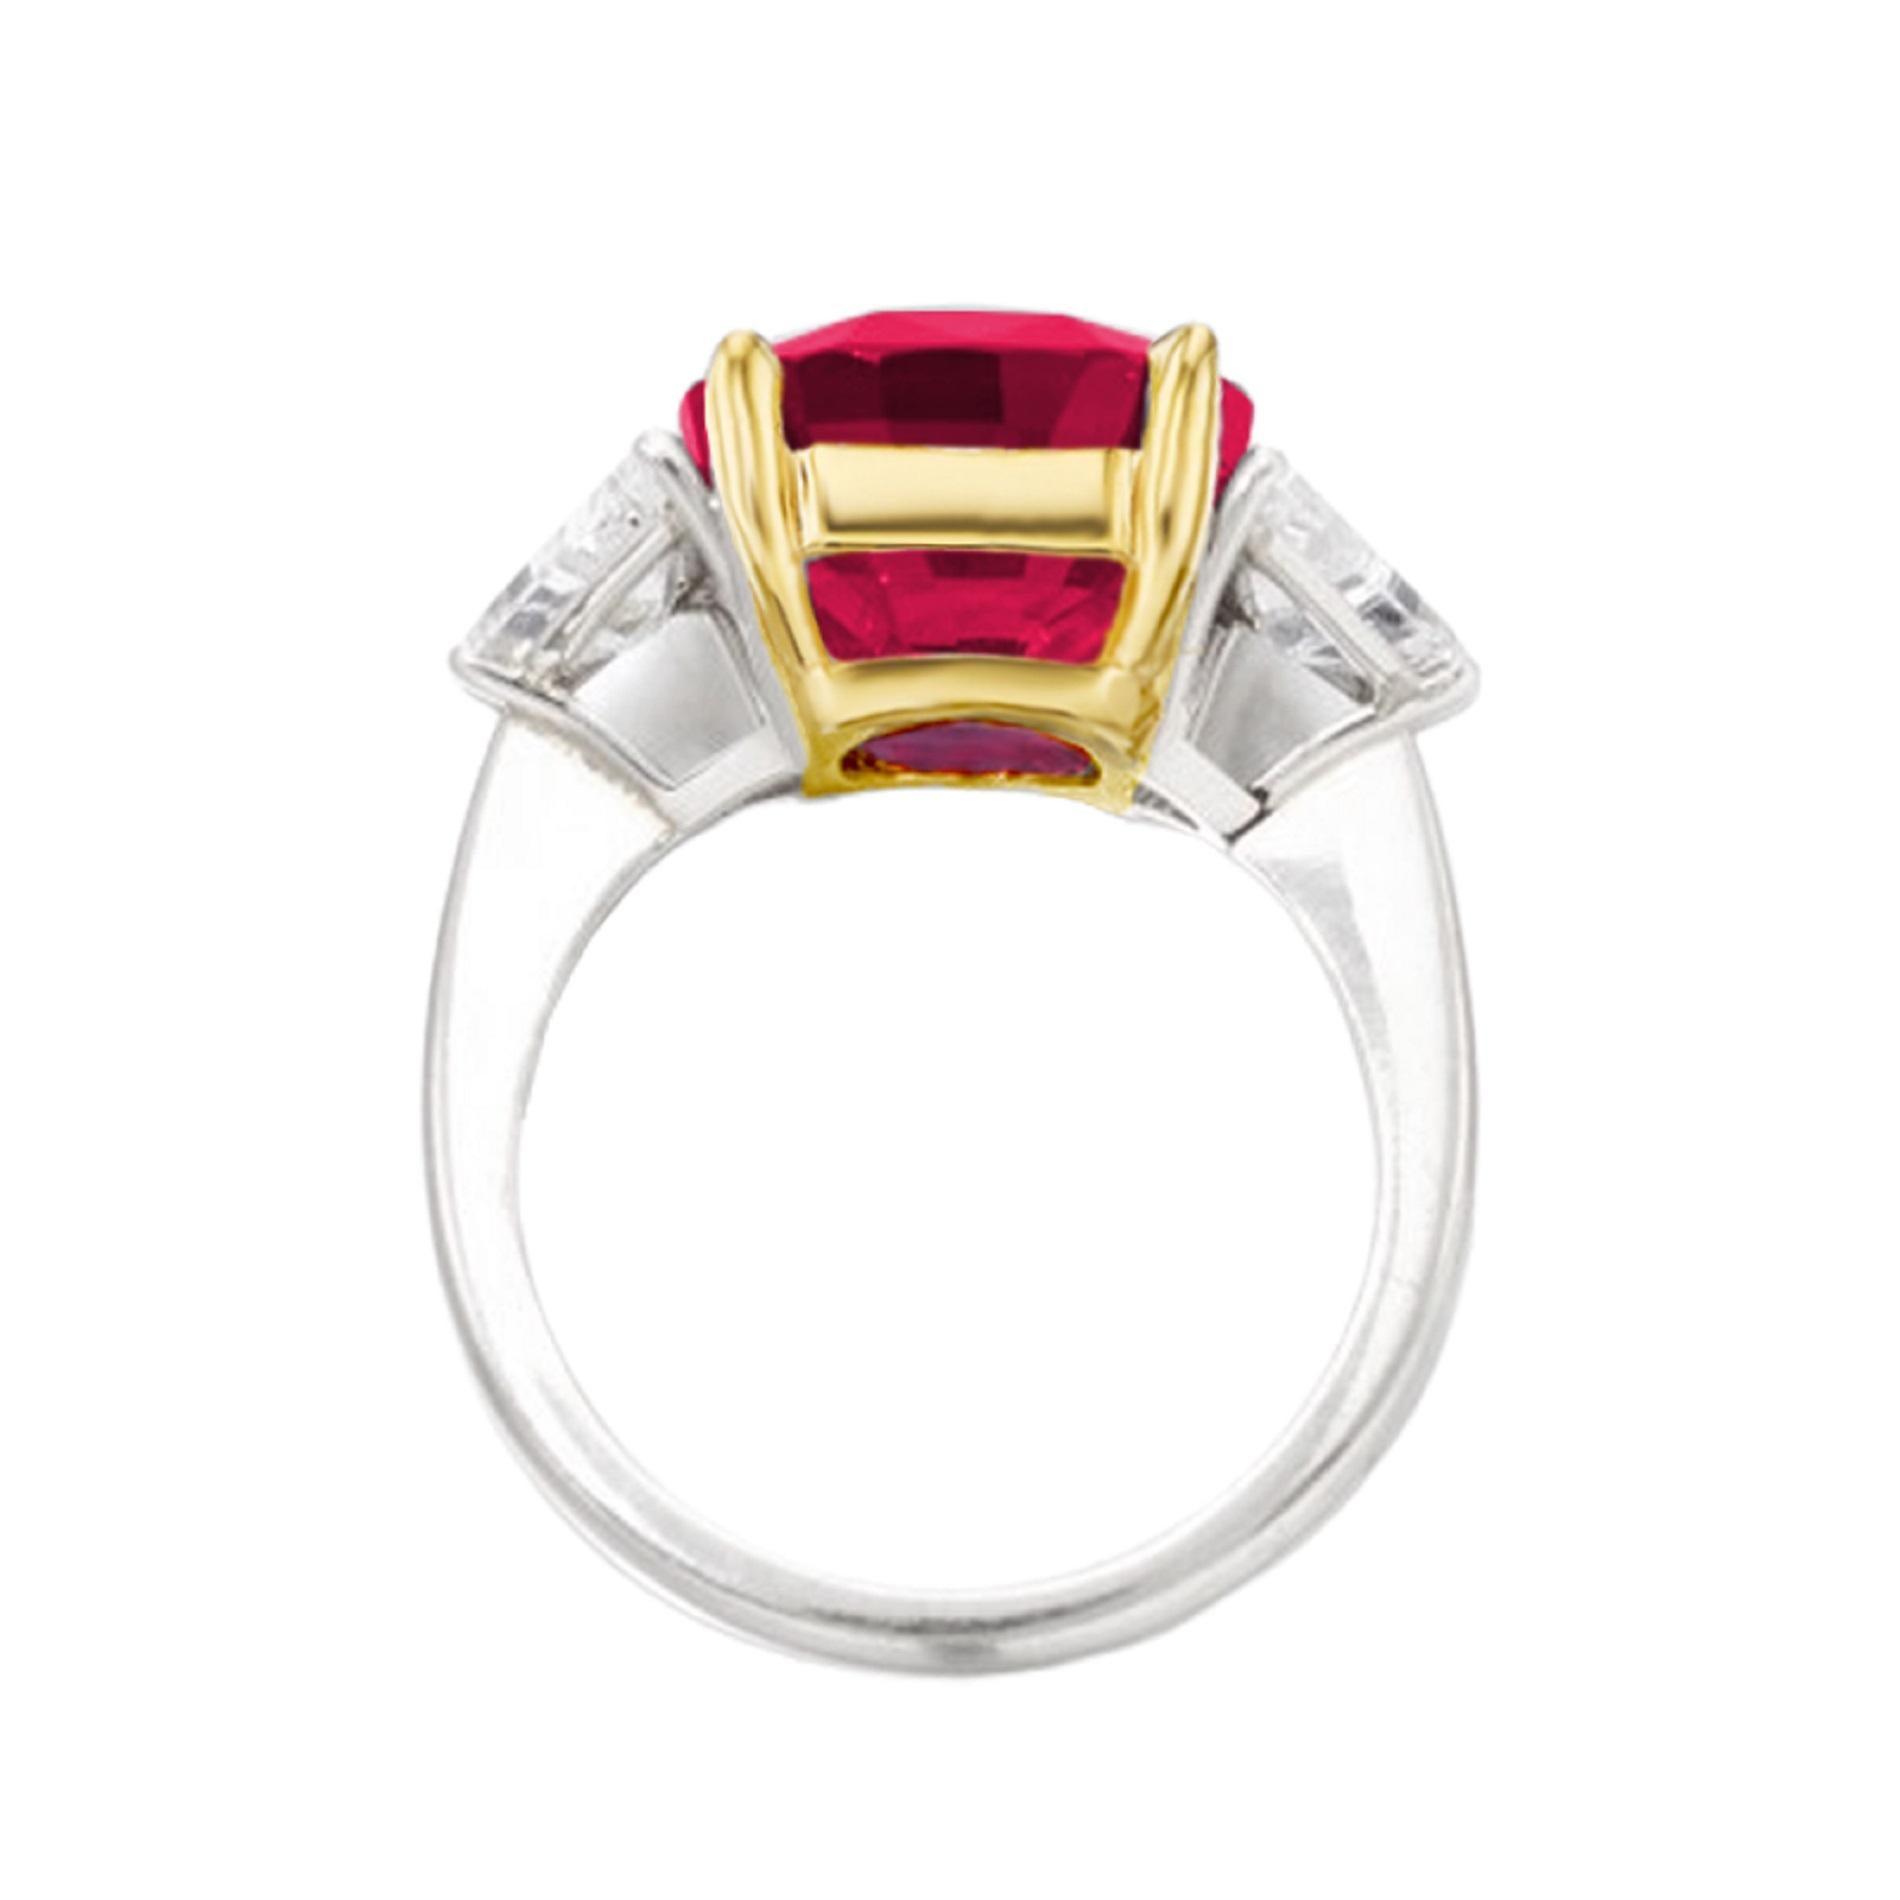 This exquisite ring features a substantial 5.01-carat cushion-cut ruby, renowned for its captivating 